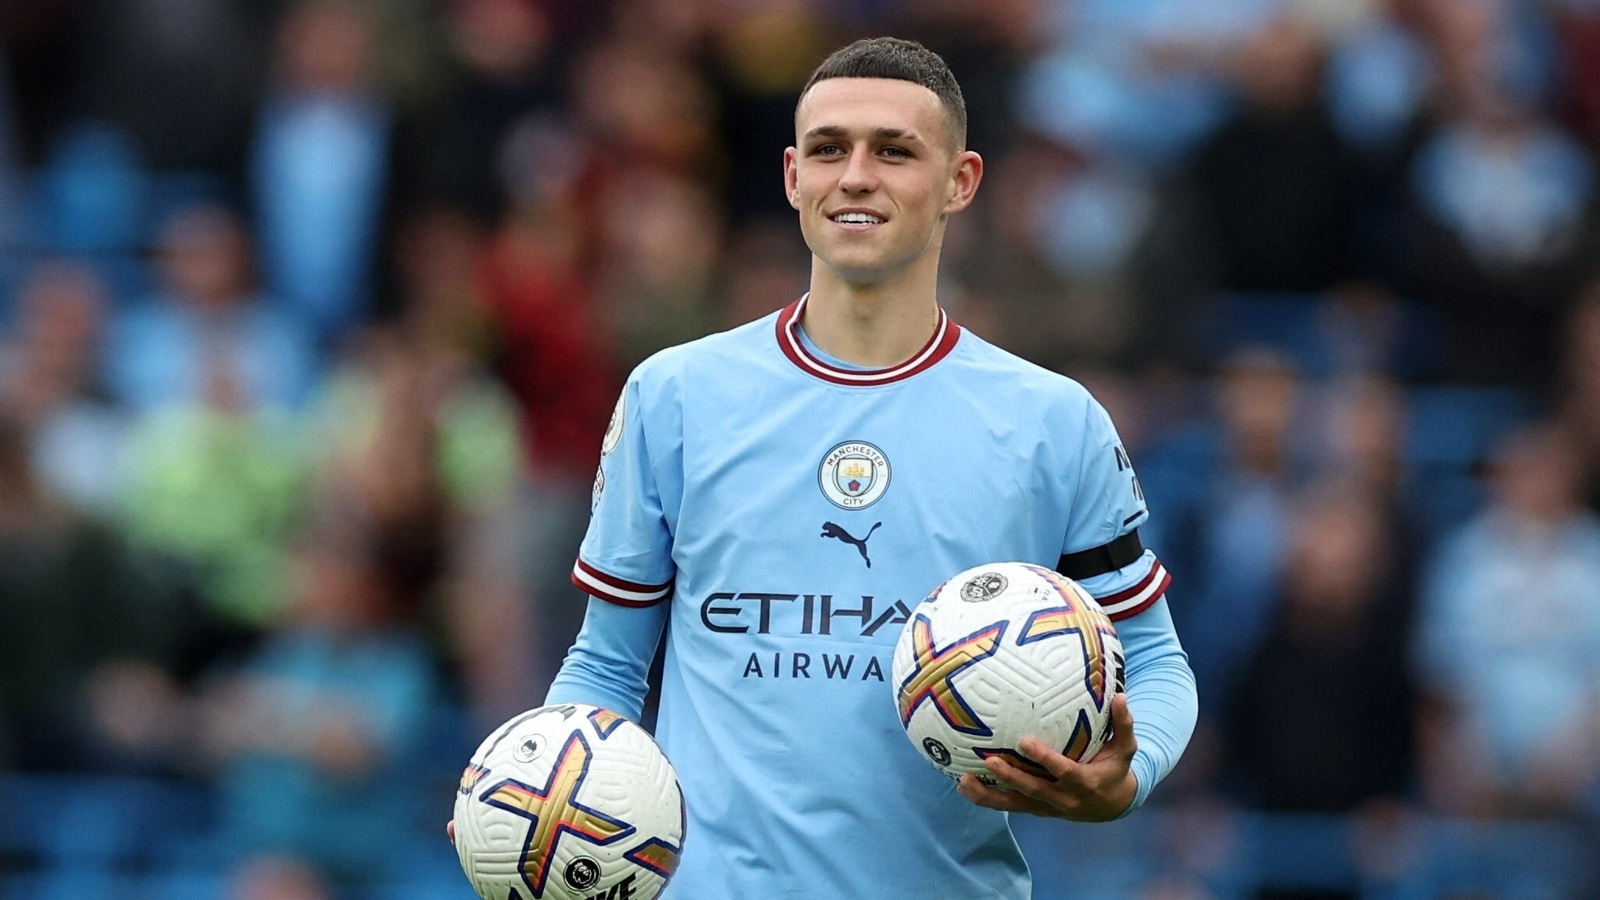 Guardiola wants ‘exceptional’ Phil Foden to stay at City for many years